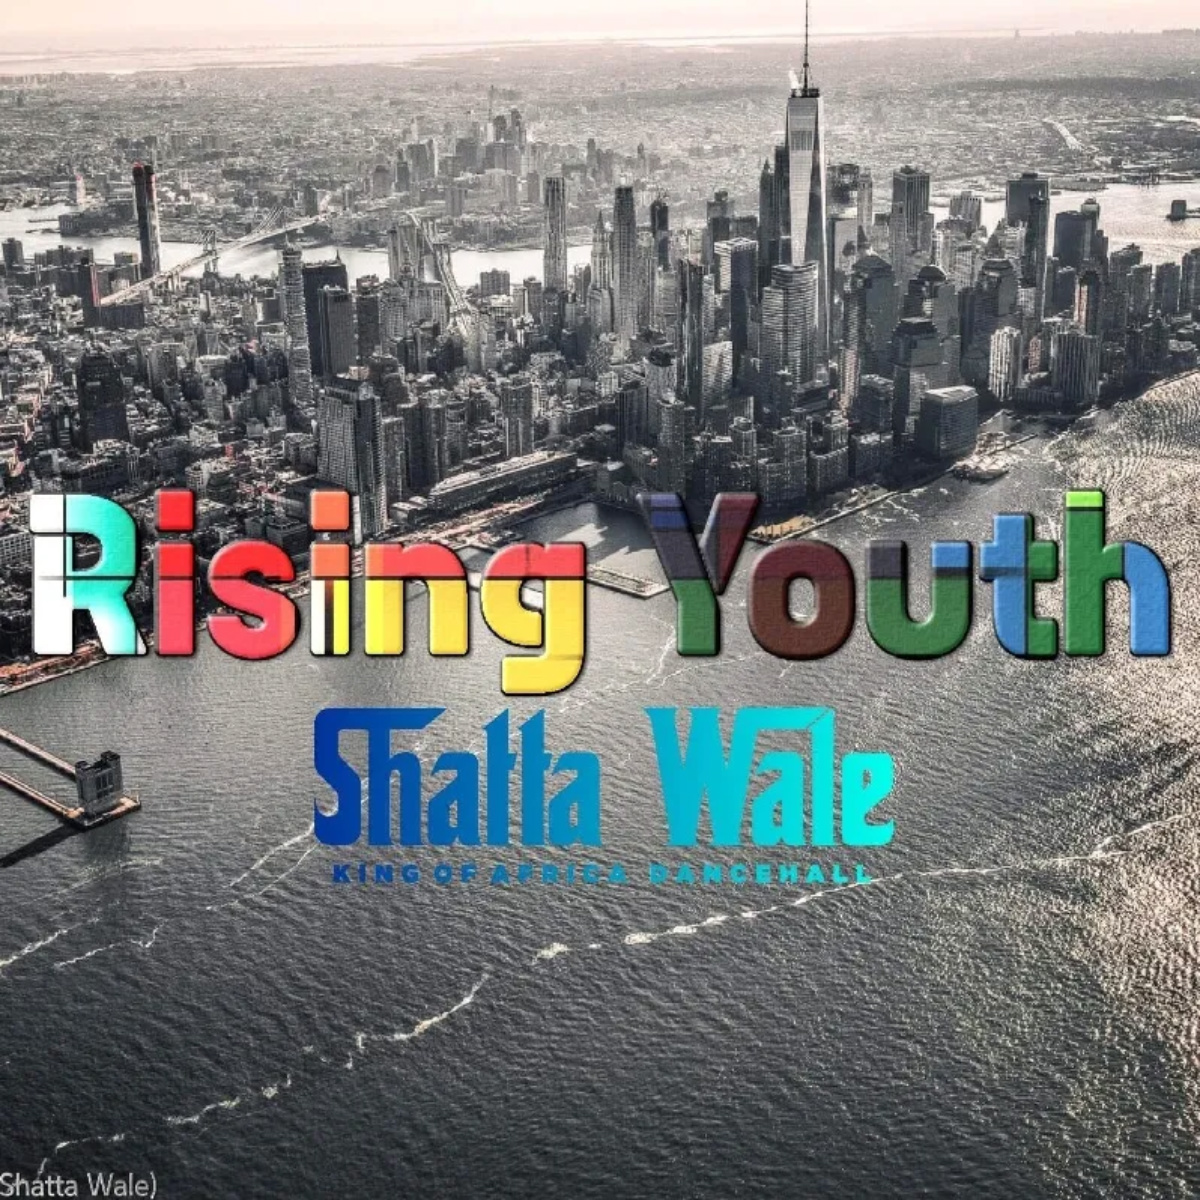 Rising Youth by Shatta Wale